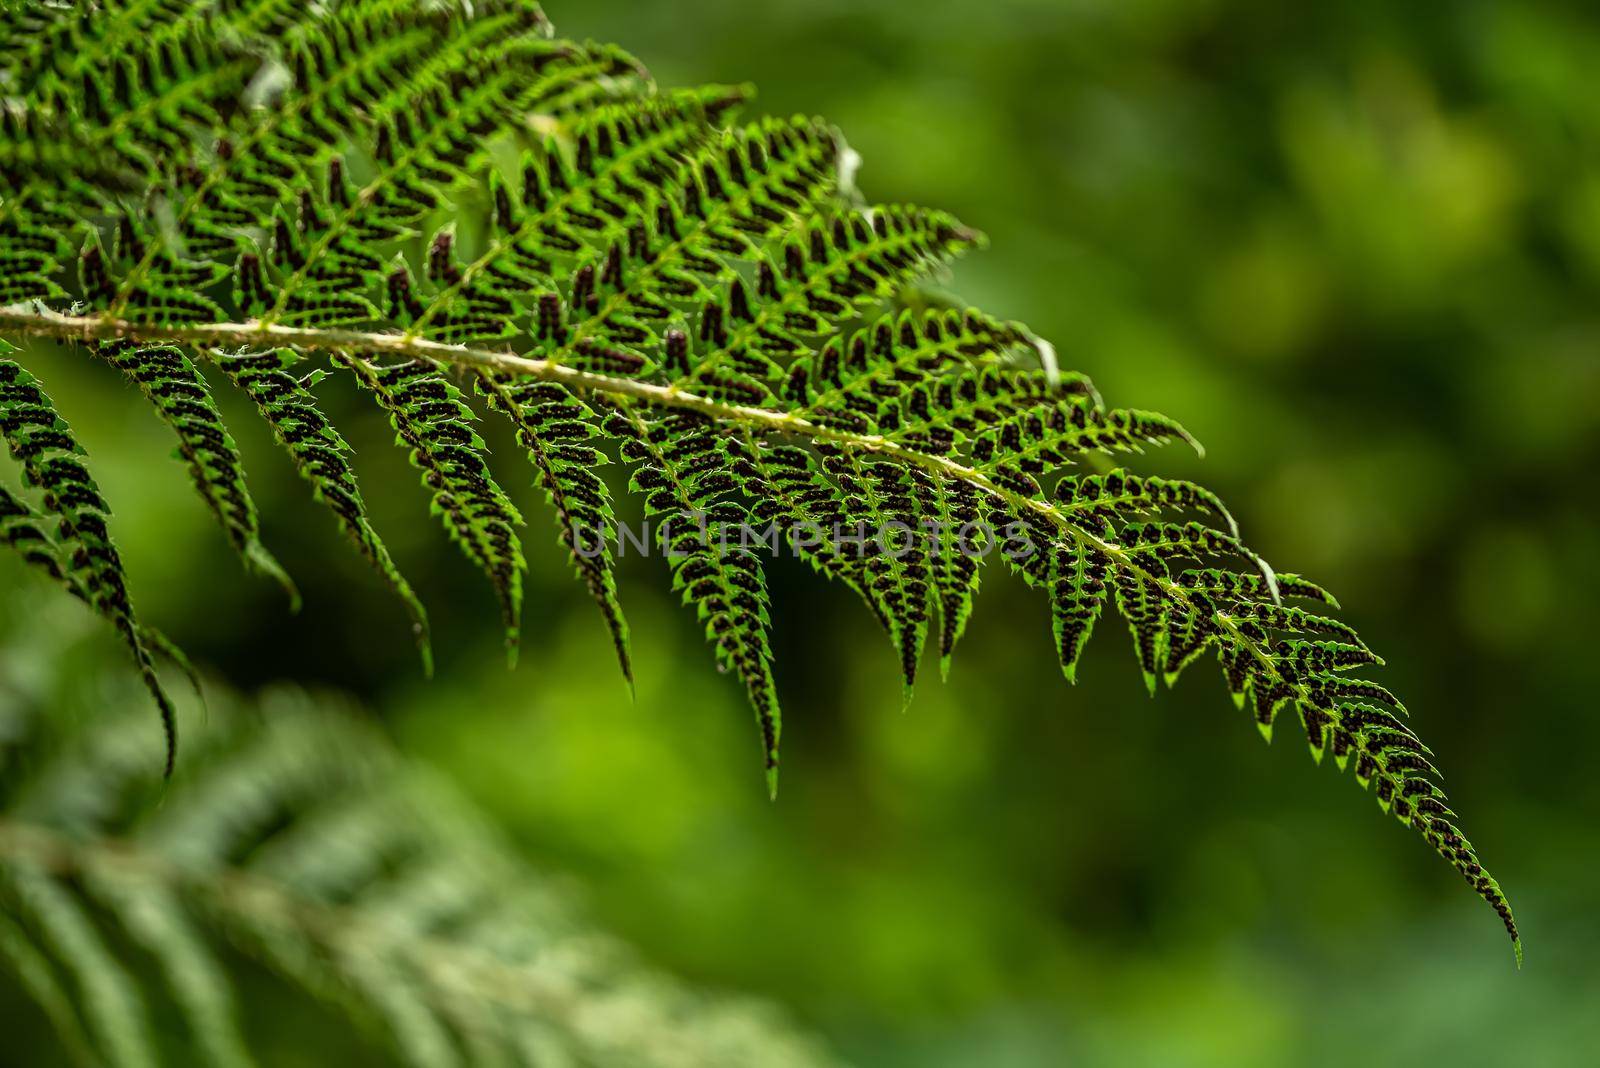 Leave of a fern in the summer green forest by Estival